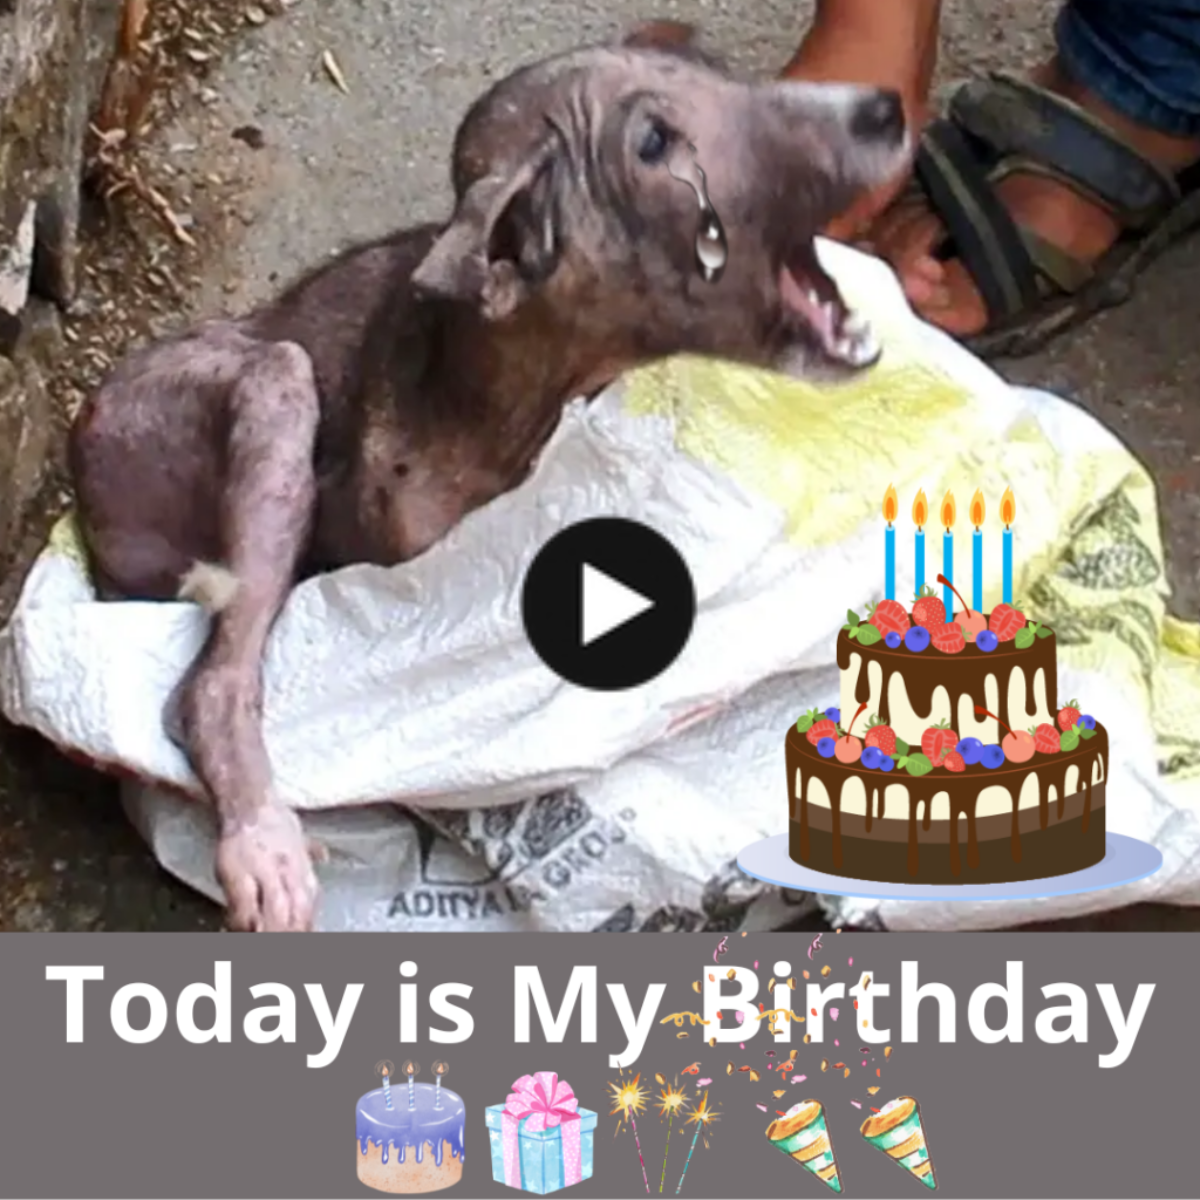 On a Stray’s Birthday: Seeking Safety and Assistance